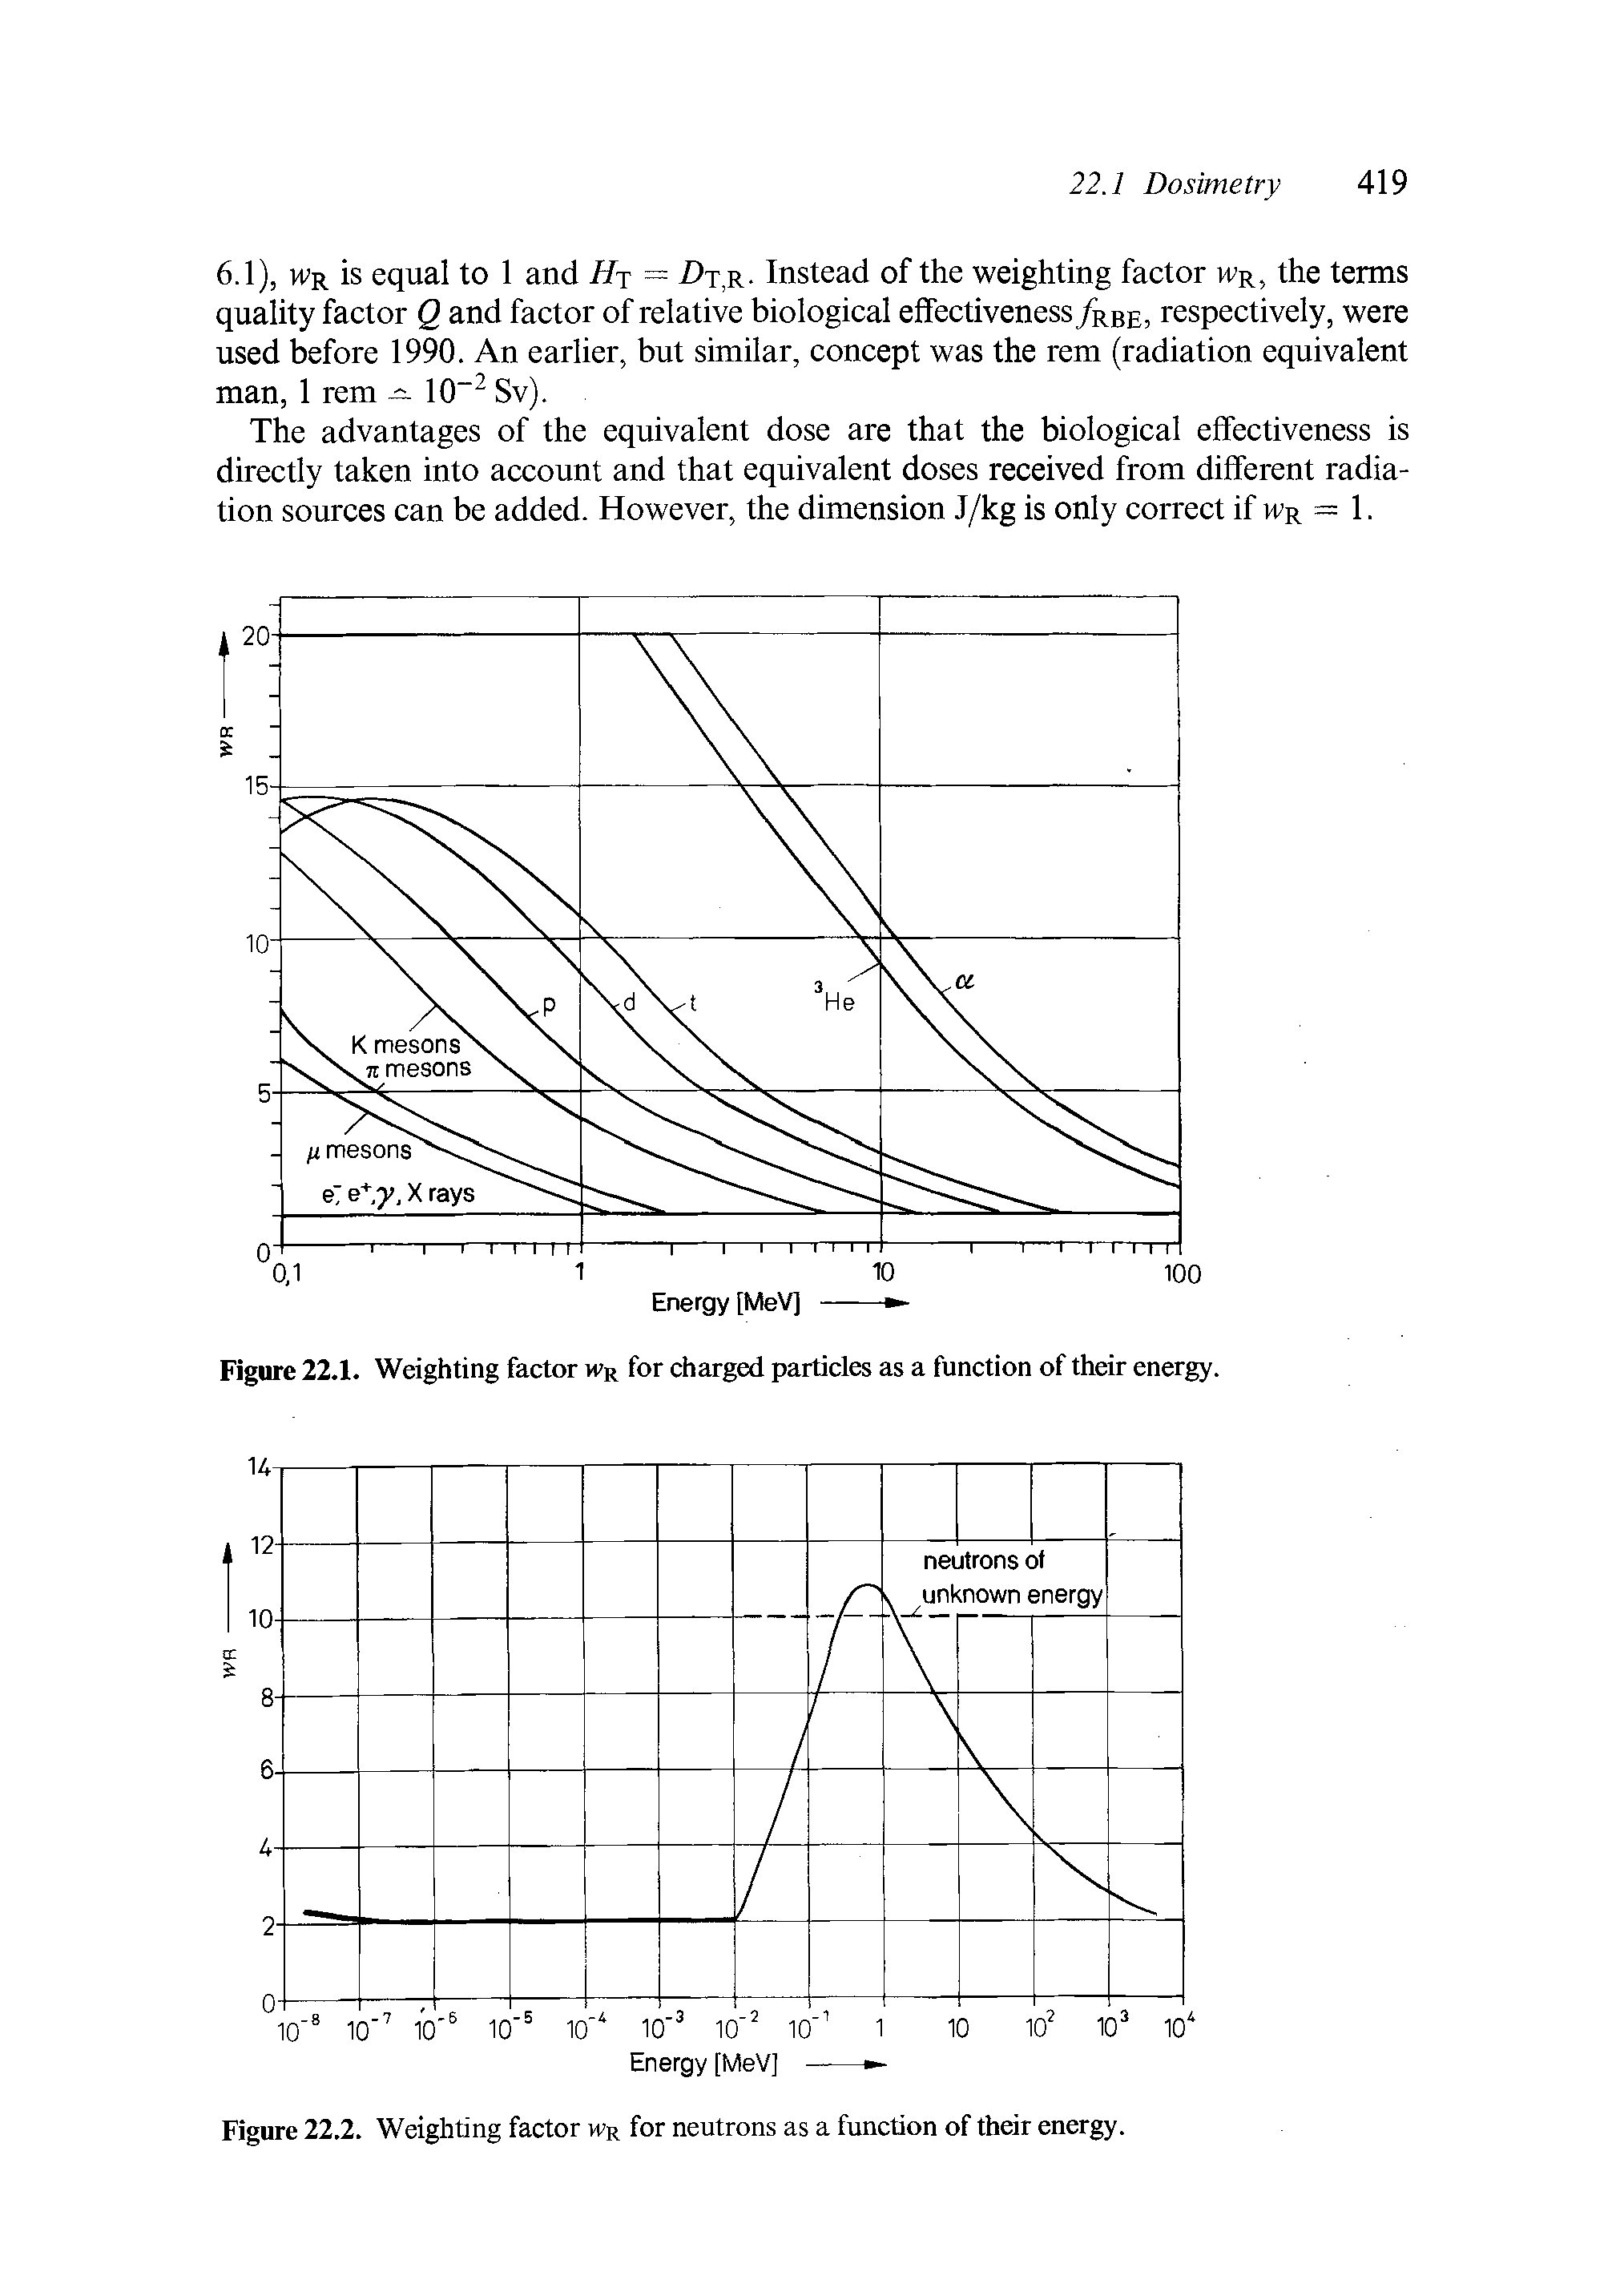 Figure 22.2. Weighting factor wr for neutrons as a function of their energy.